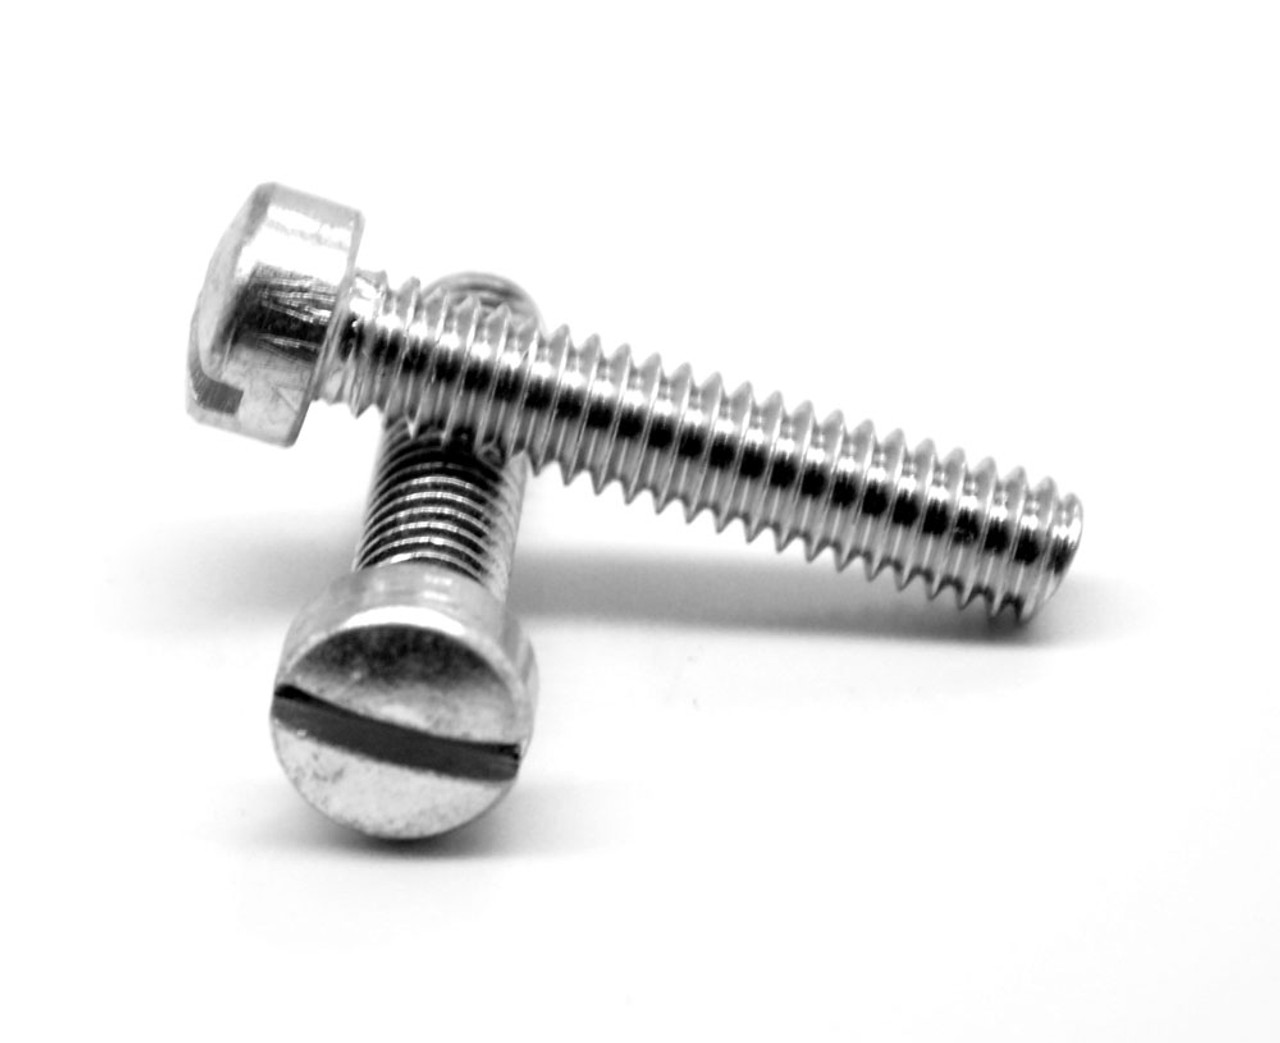 #8-32 x 1/2" (FT) Coarse Thread Machine Screw Slotted Fillister Head Stainless Steel 18-8